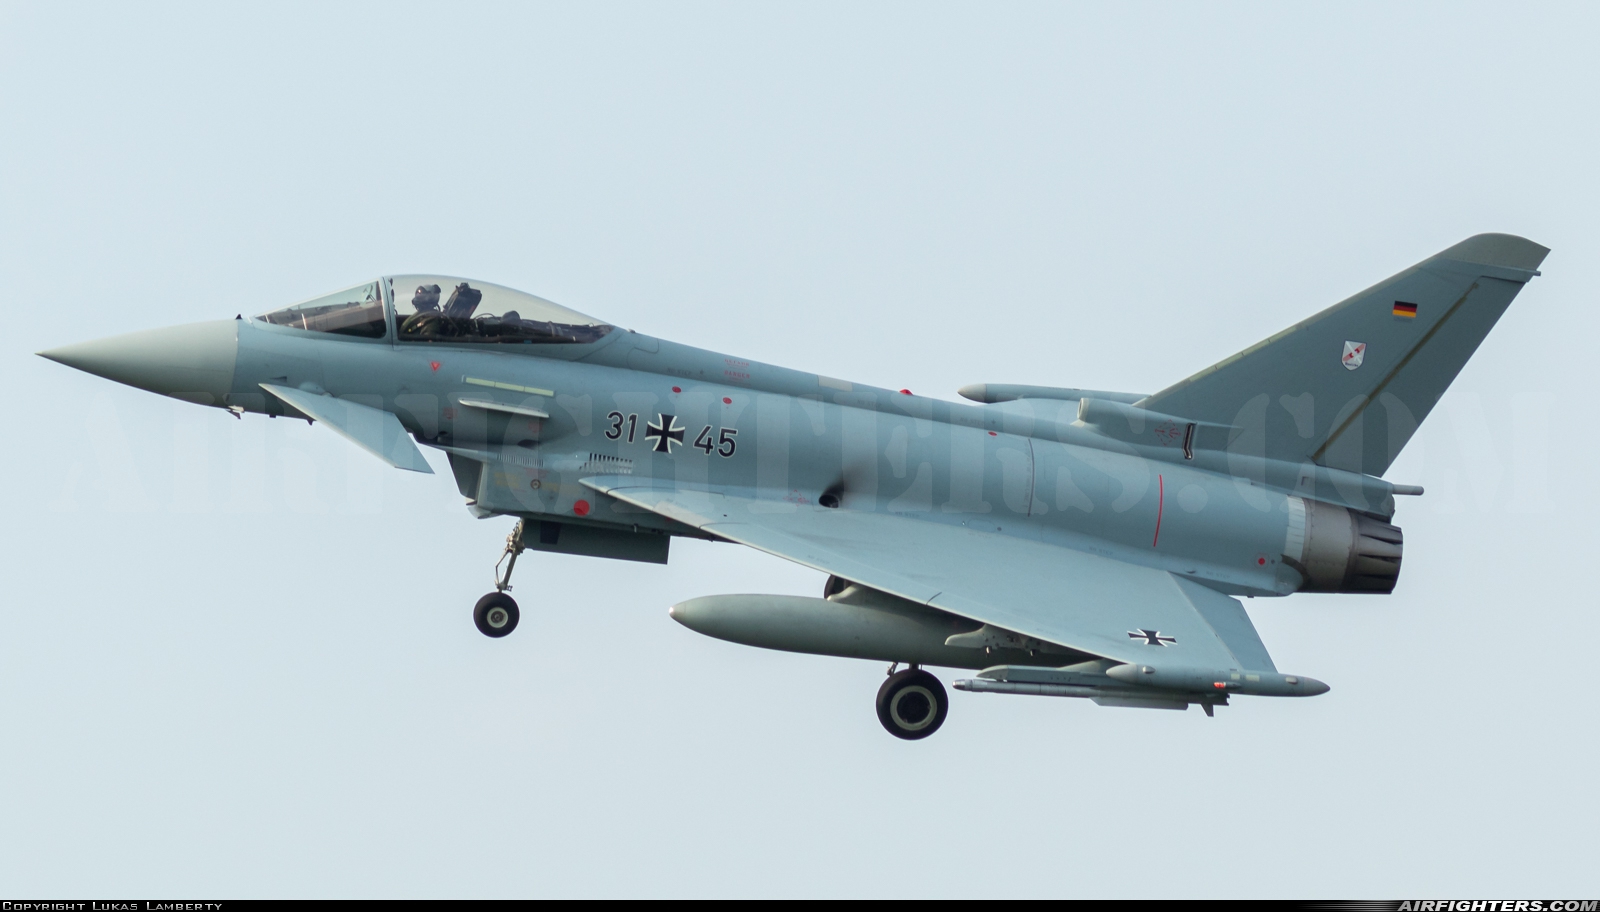 Germany - Air Force Eurofighter EF-2000 Typhoon S 31+45 at Norvenich (ETNN), Germany